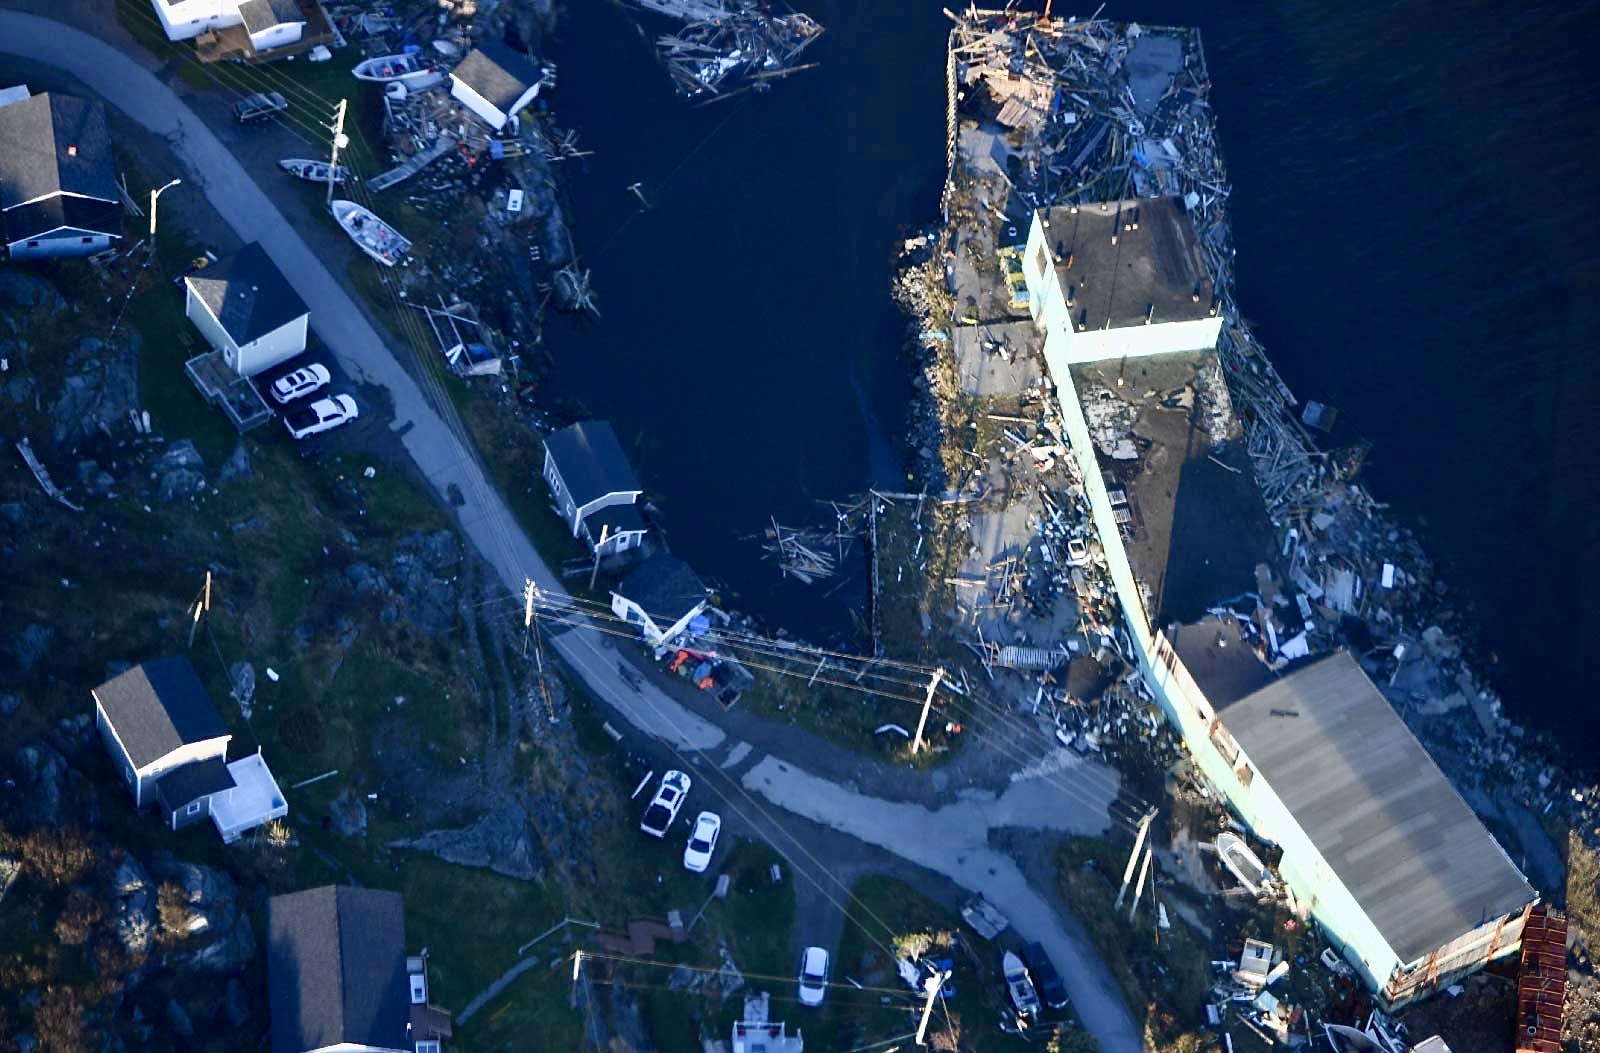 Aerial surveillance photo taken by the National Aerial Surveillance Program crew shows the damage of Hurricane Fiona on a coastal community in Atlantic Canada.